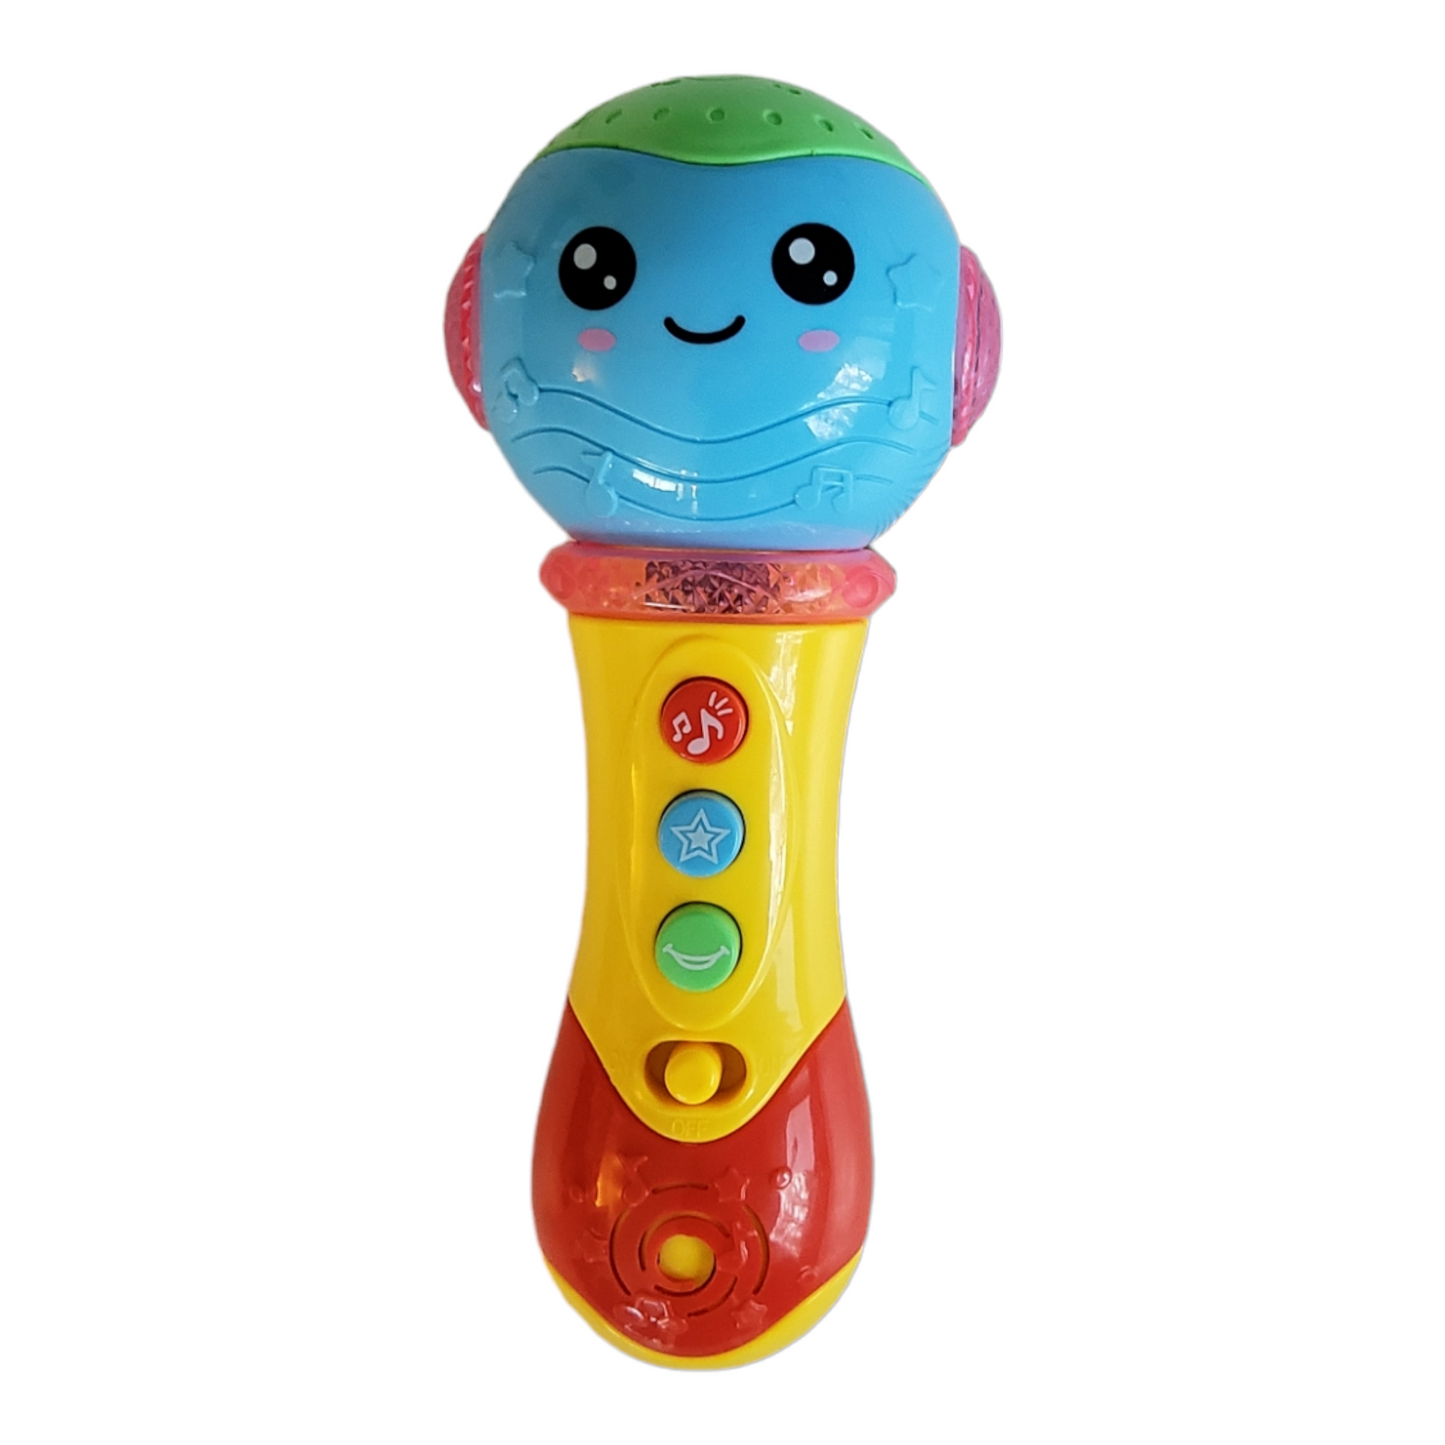 Baby Microphone